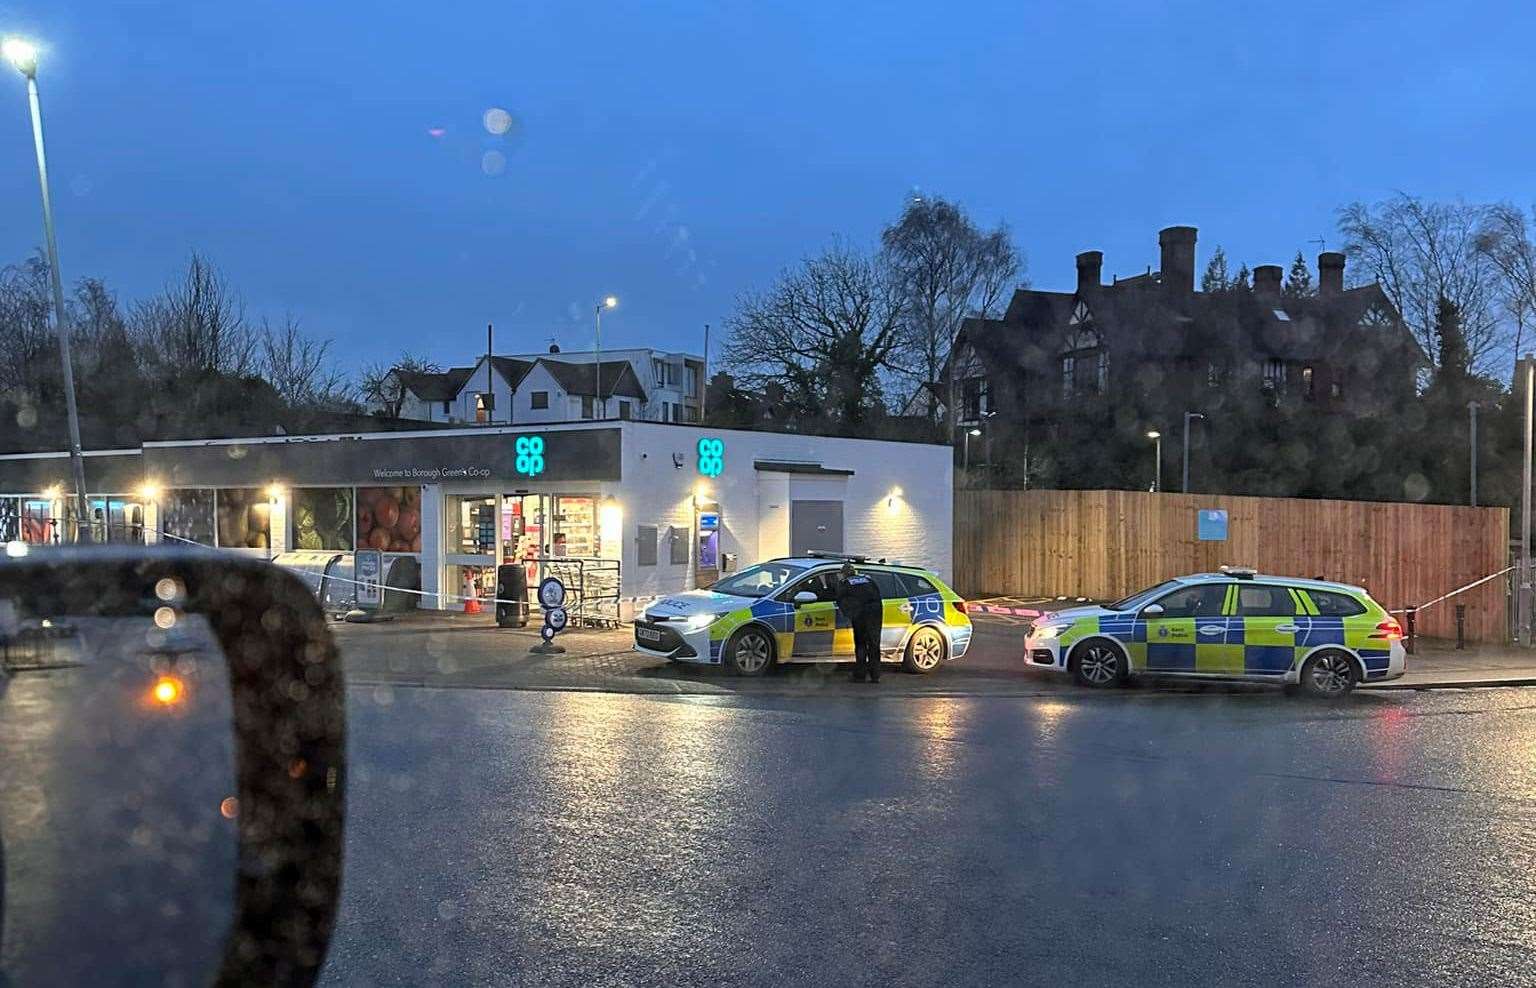 Police were spotted outside the Borough Green Co-op in Station Approach